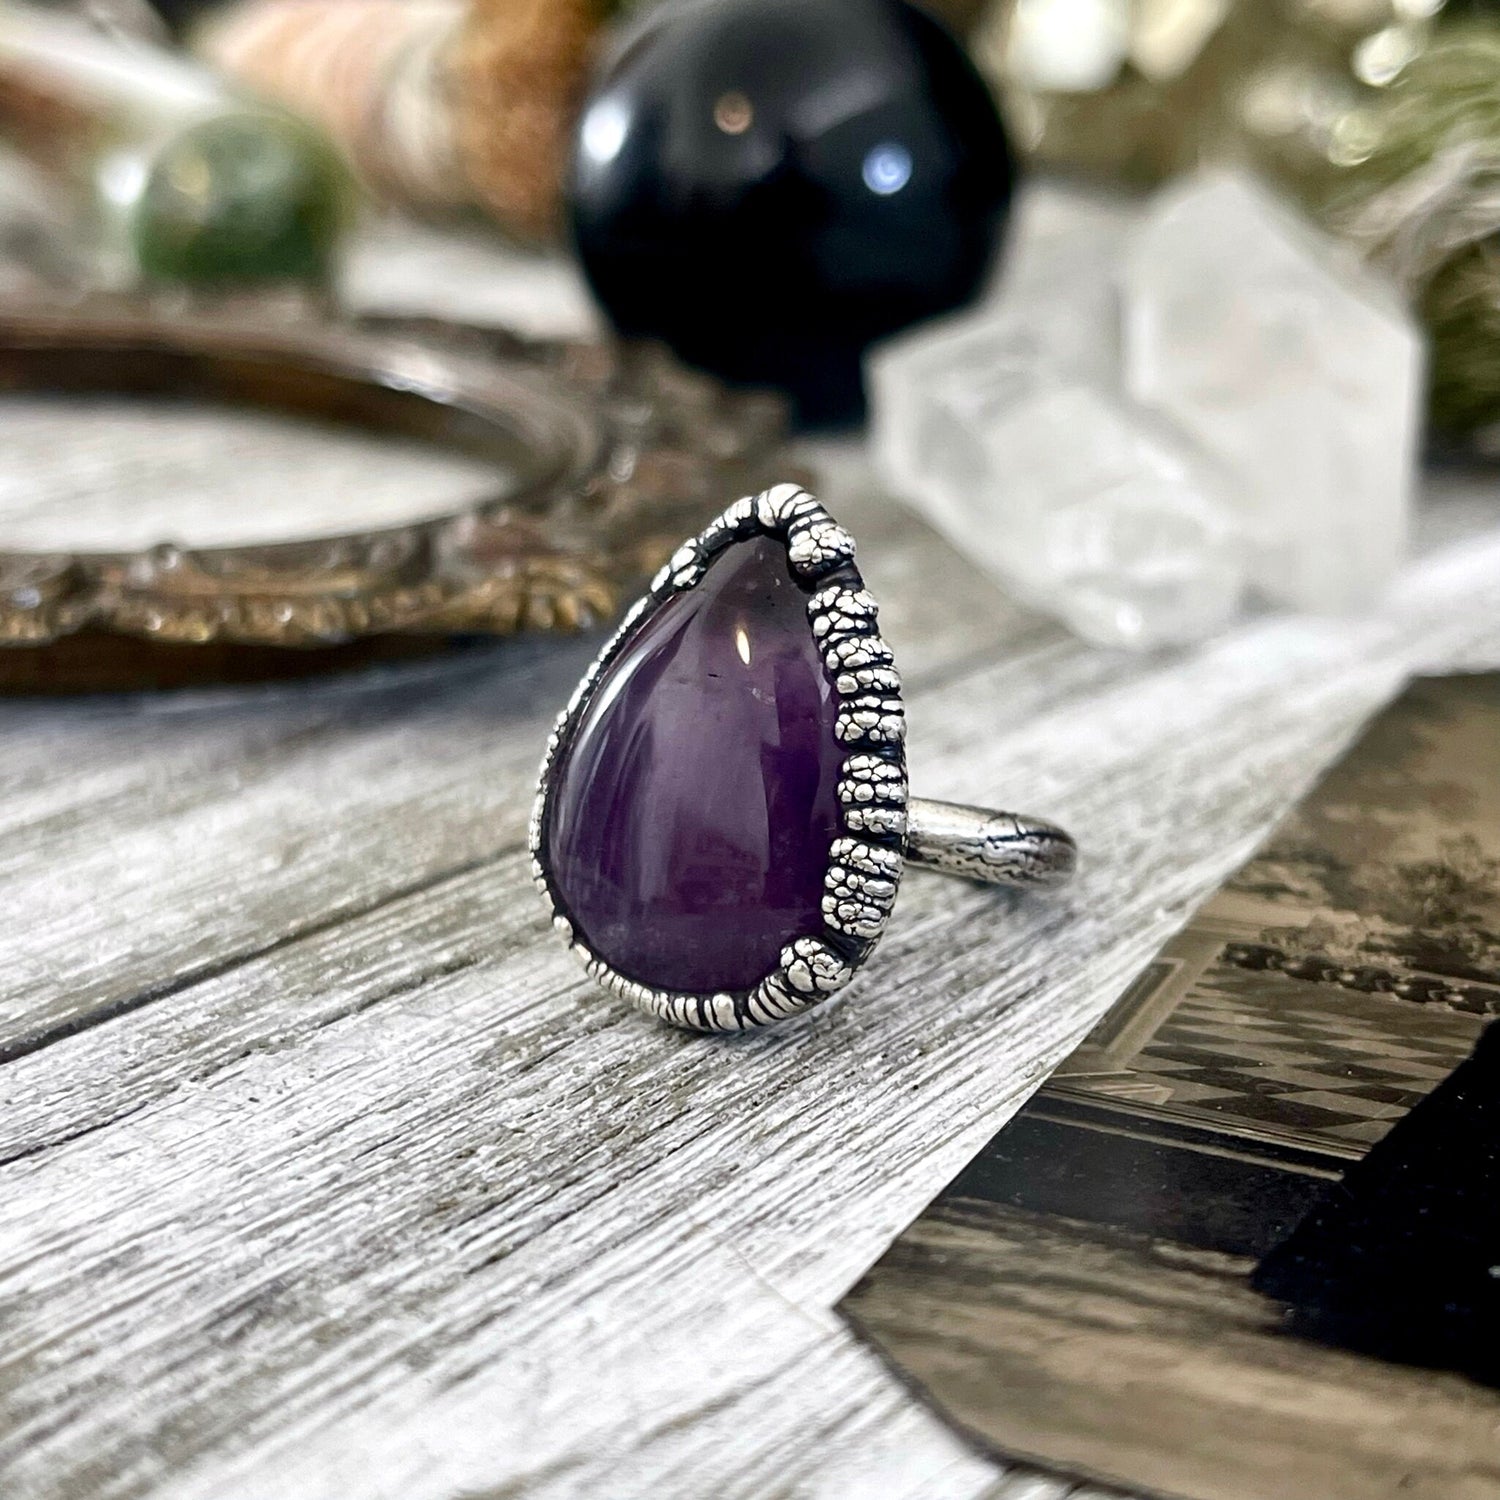 Size 7 Purple Amethyst Teardrop Gemstone Crystal Ring Set in Fine Silver / Foxlark Collection - One of a Kind / Gothic Jewelry